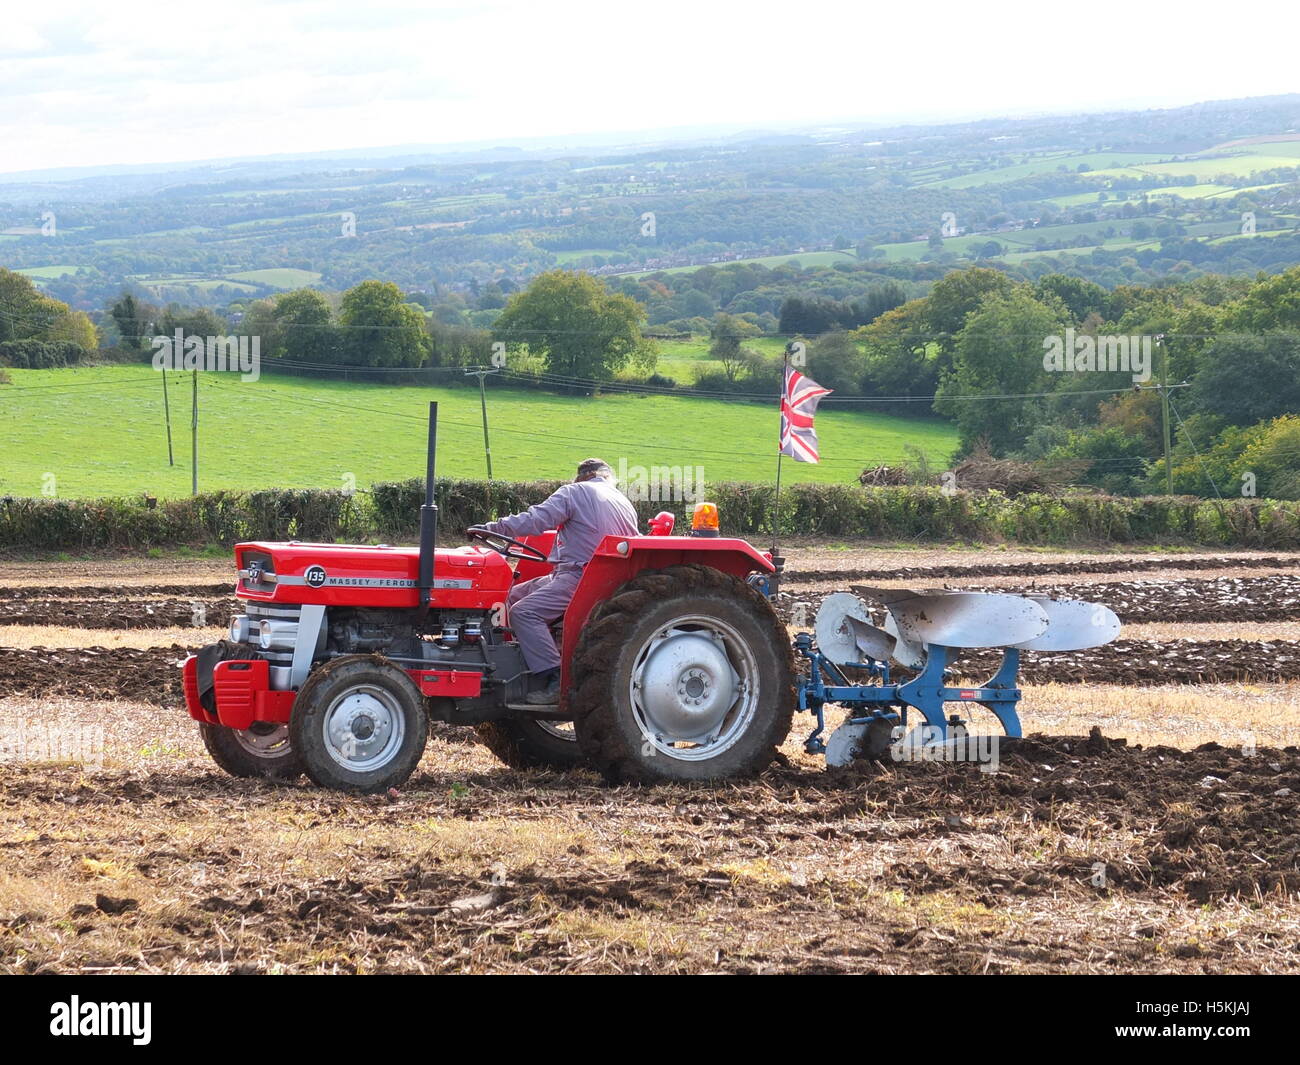 A farmer flying the Union Jack flag from his tractor competing in the Ashover Ploughing Match held at Highoredish Farm, Derbys. Stock Photo